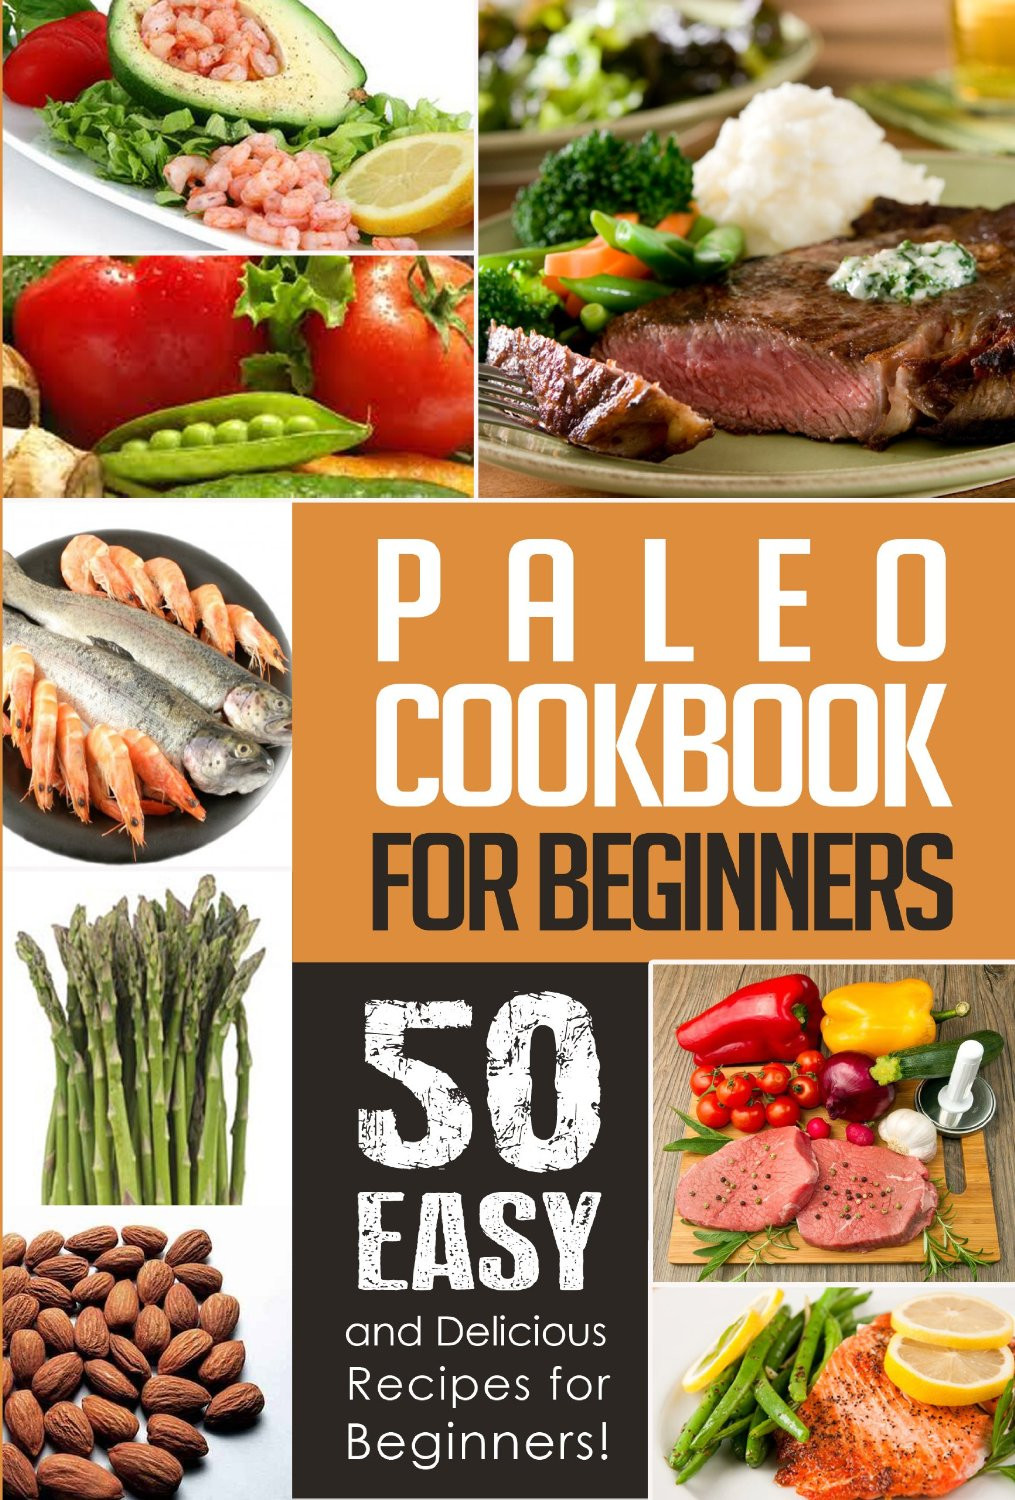 Paleo Diet Cookbook Fresh Get Started On the Paleo Diet – 100’s Of Recipes &amp; Free Ebooks